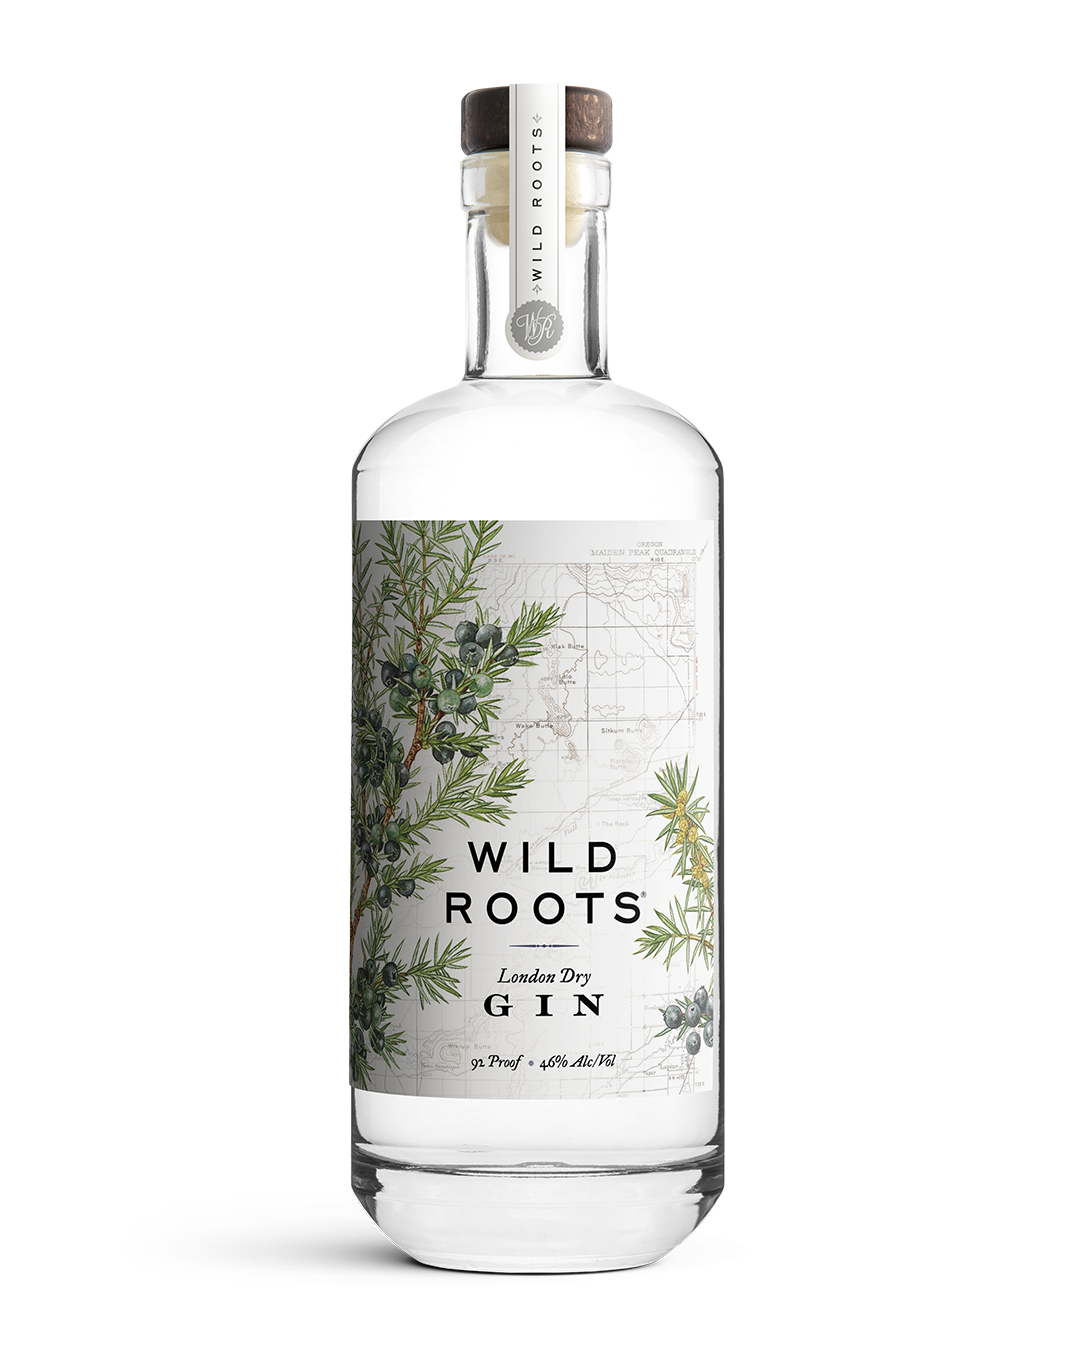 London Dry Gin Wild – Roots